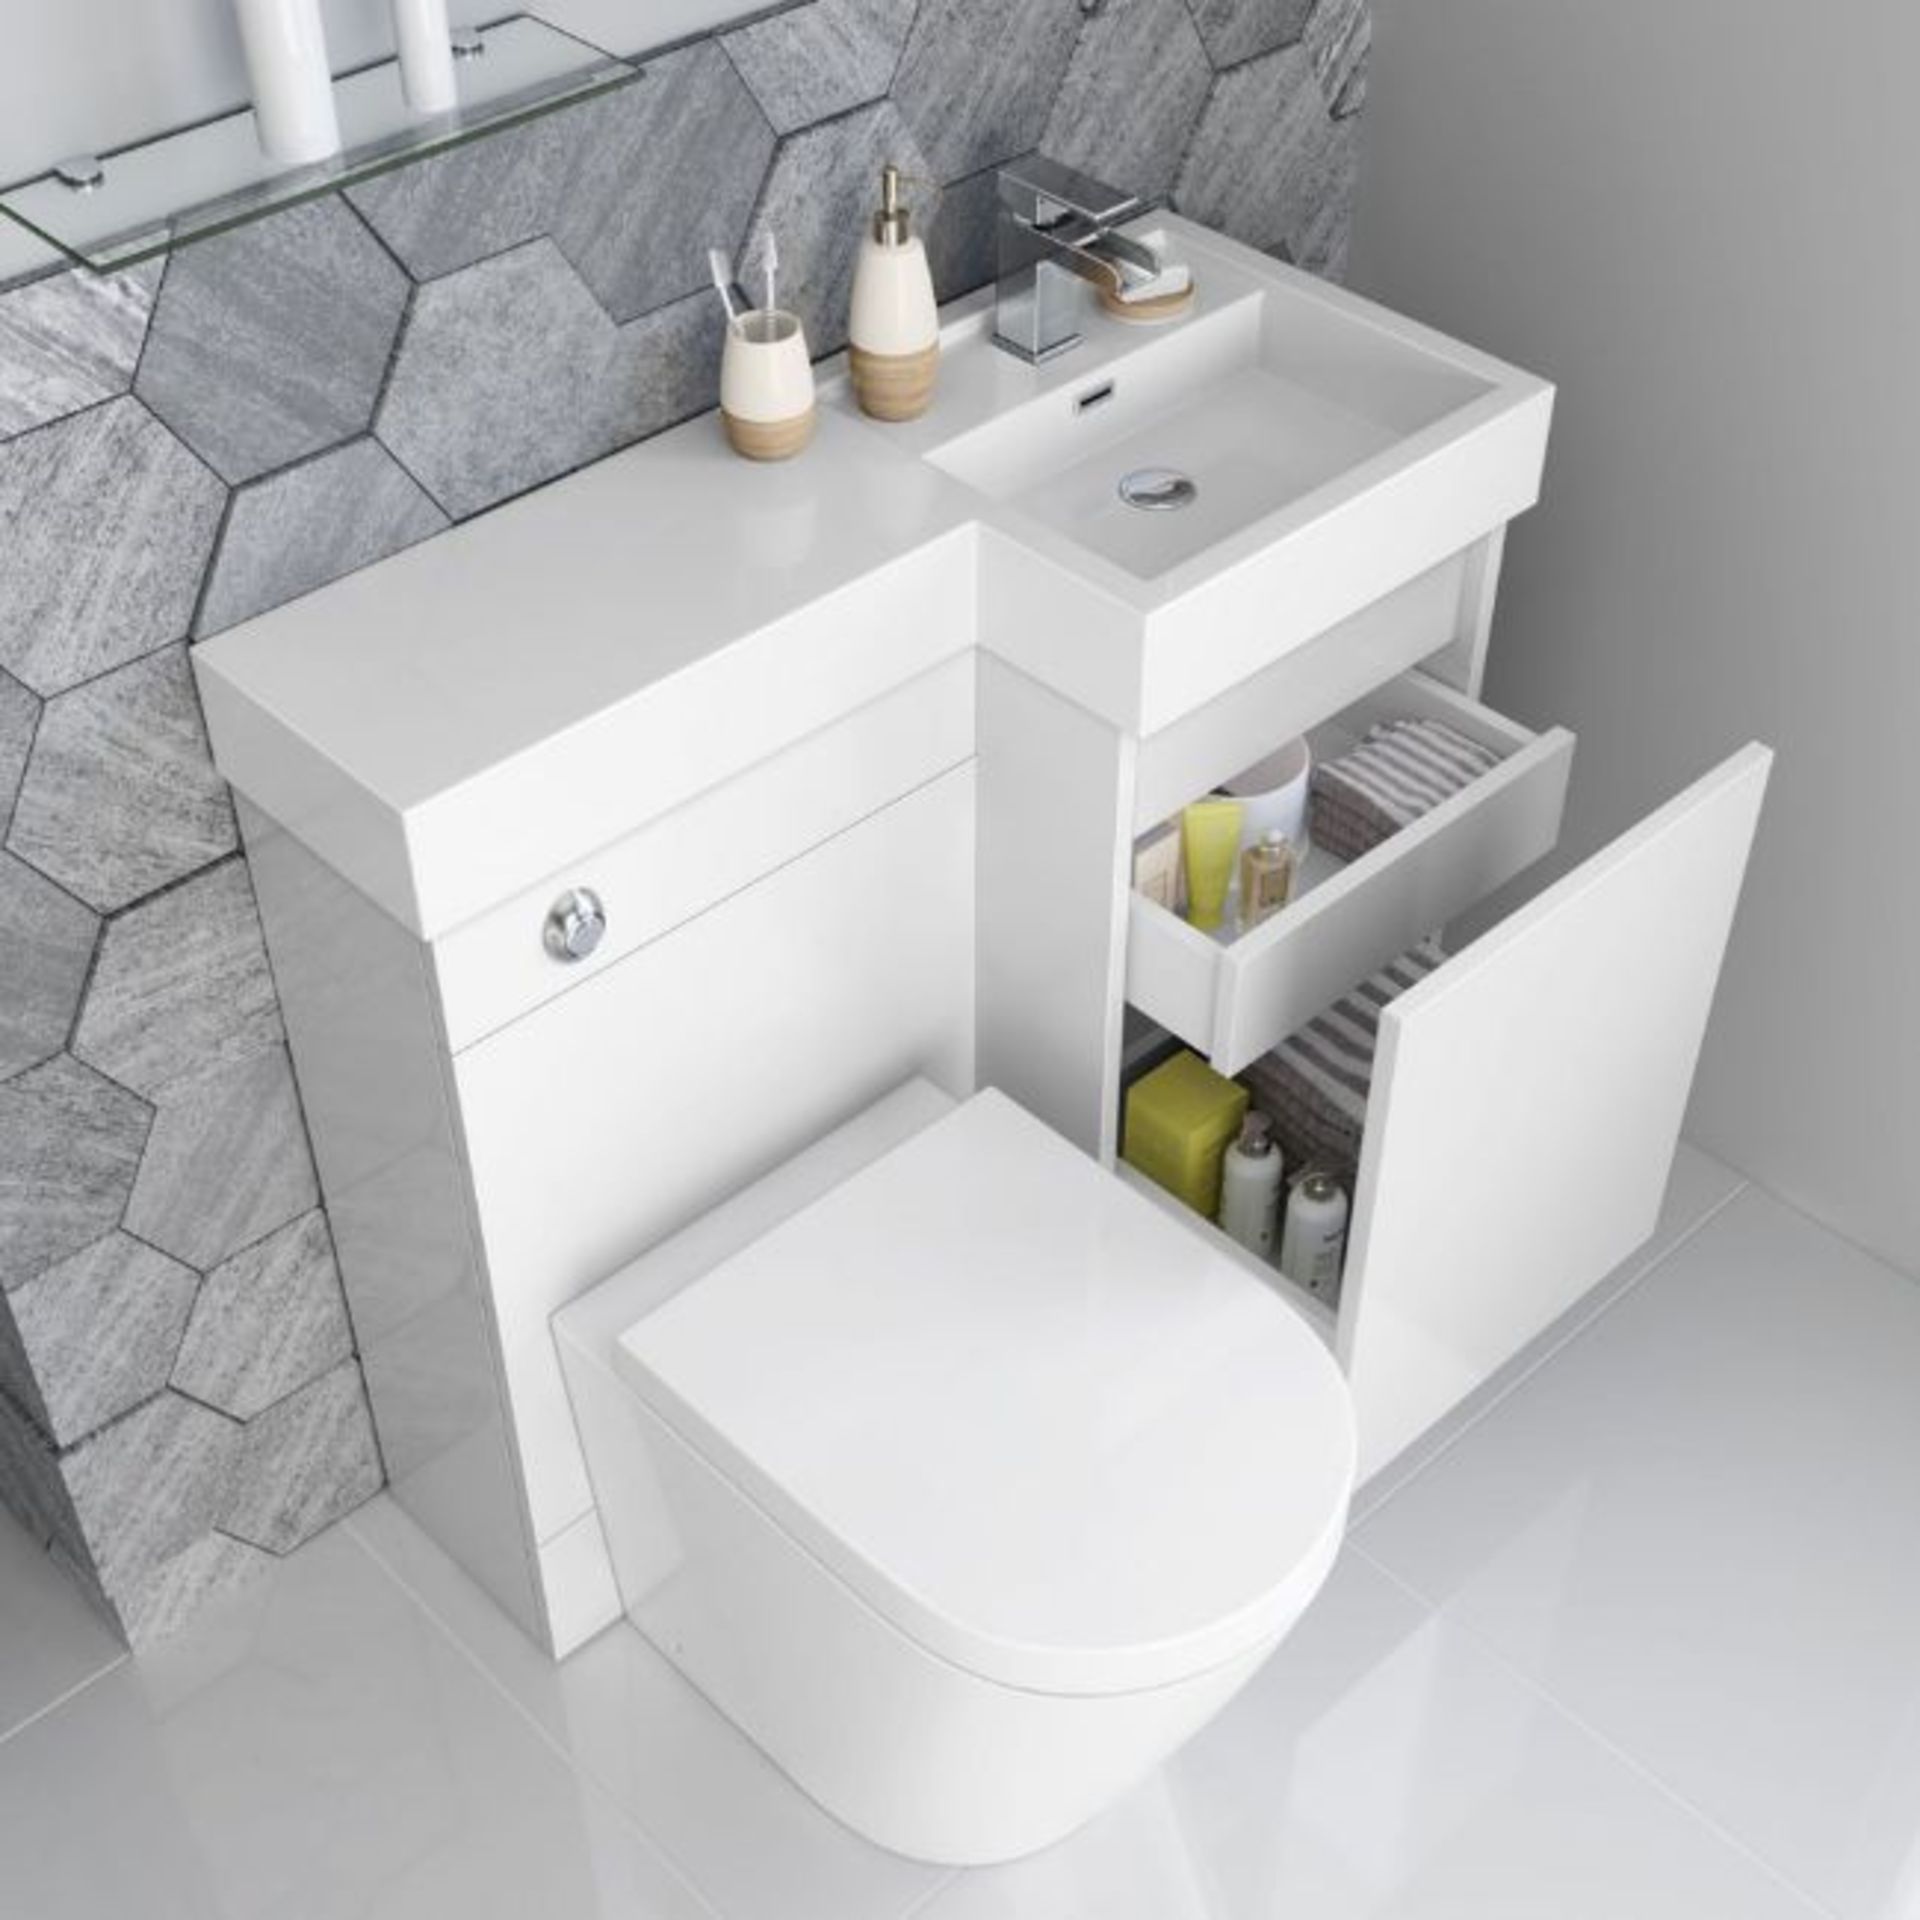 New & Boxed 906mm Olympia Gloss White Drawer Vanity Unit - Lyon Pan, Right Hand. Basin, Unit A... - Image 3 of 3